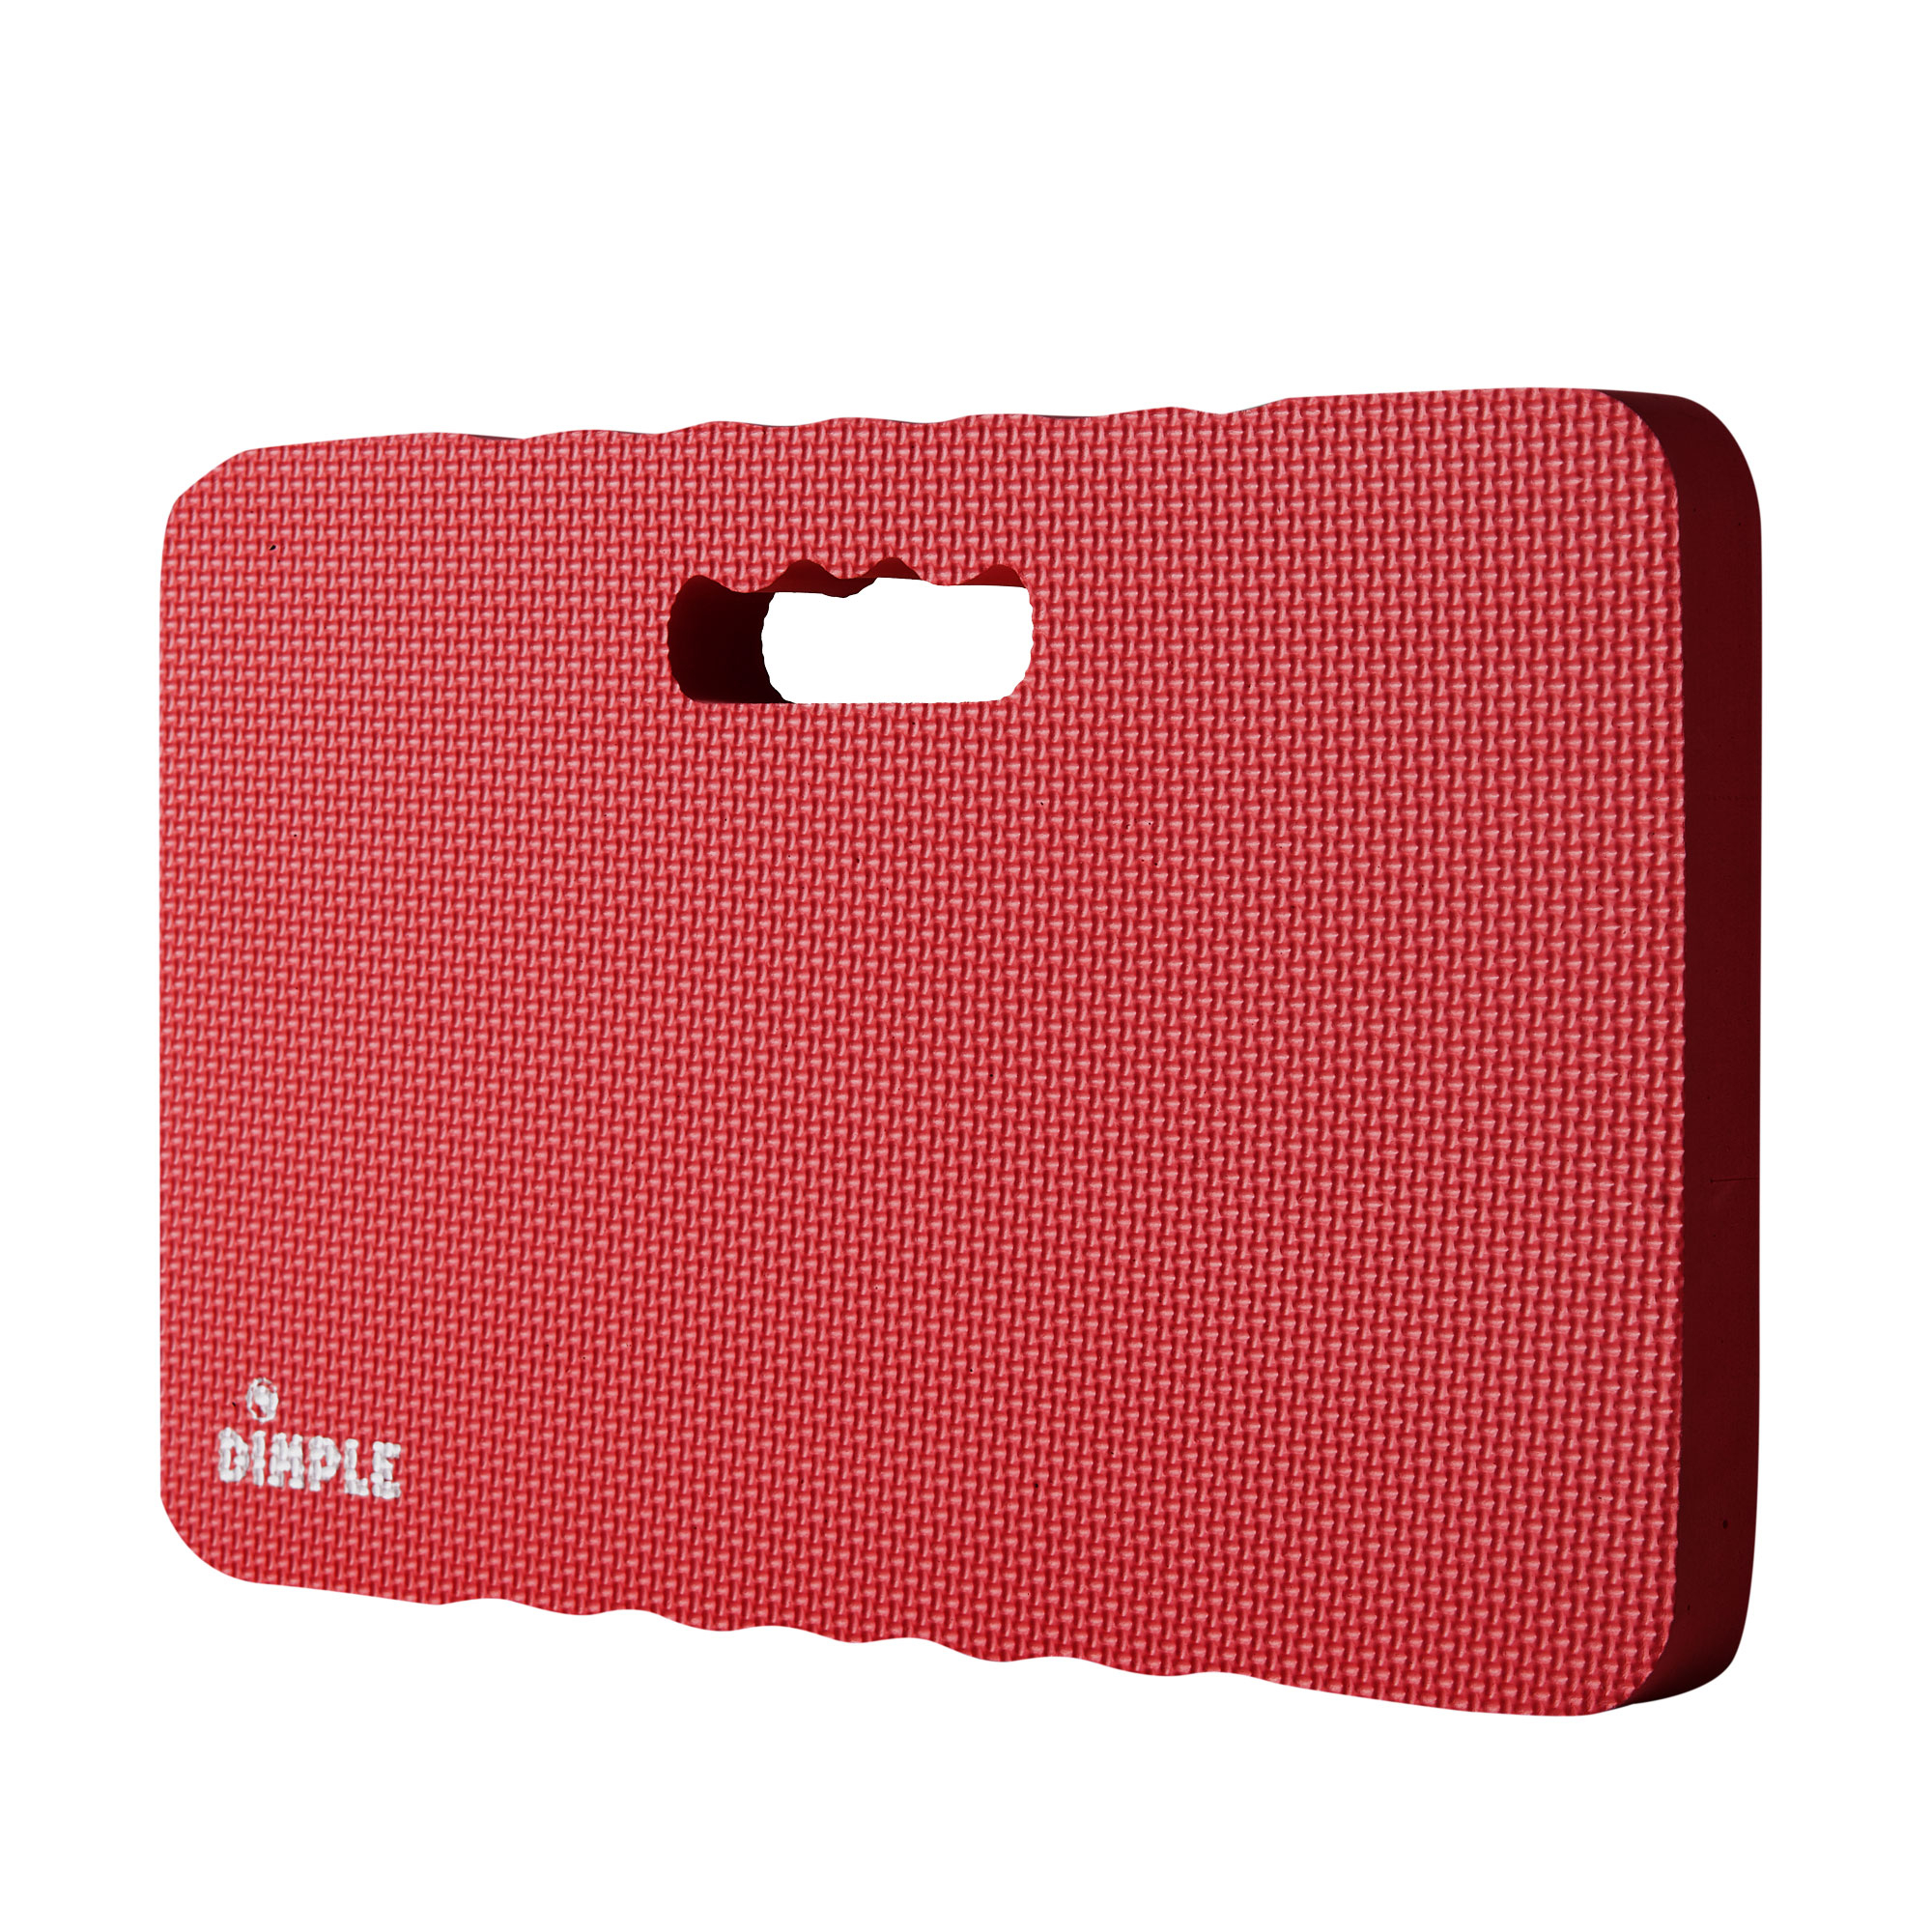 Dimple (Qty 2) High Density 1.5 Thick Foam Comfort Kneeling Pad Mats For Gardening Knee Support, Exercise, Yoga Mat, Garden Cushions (Red)